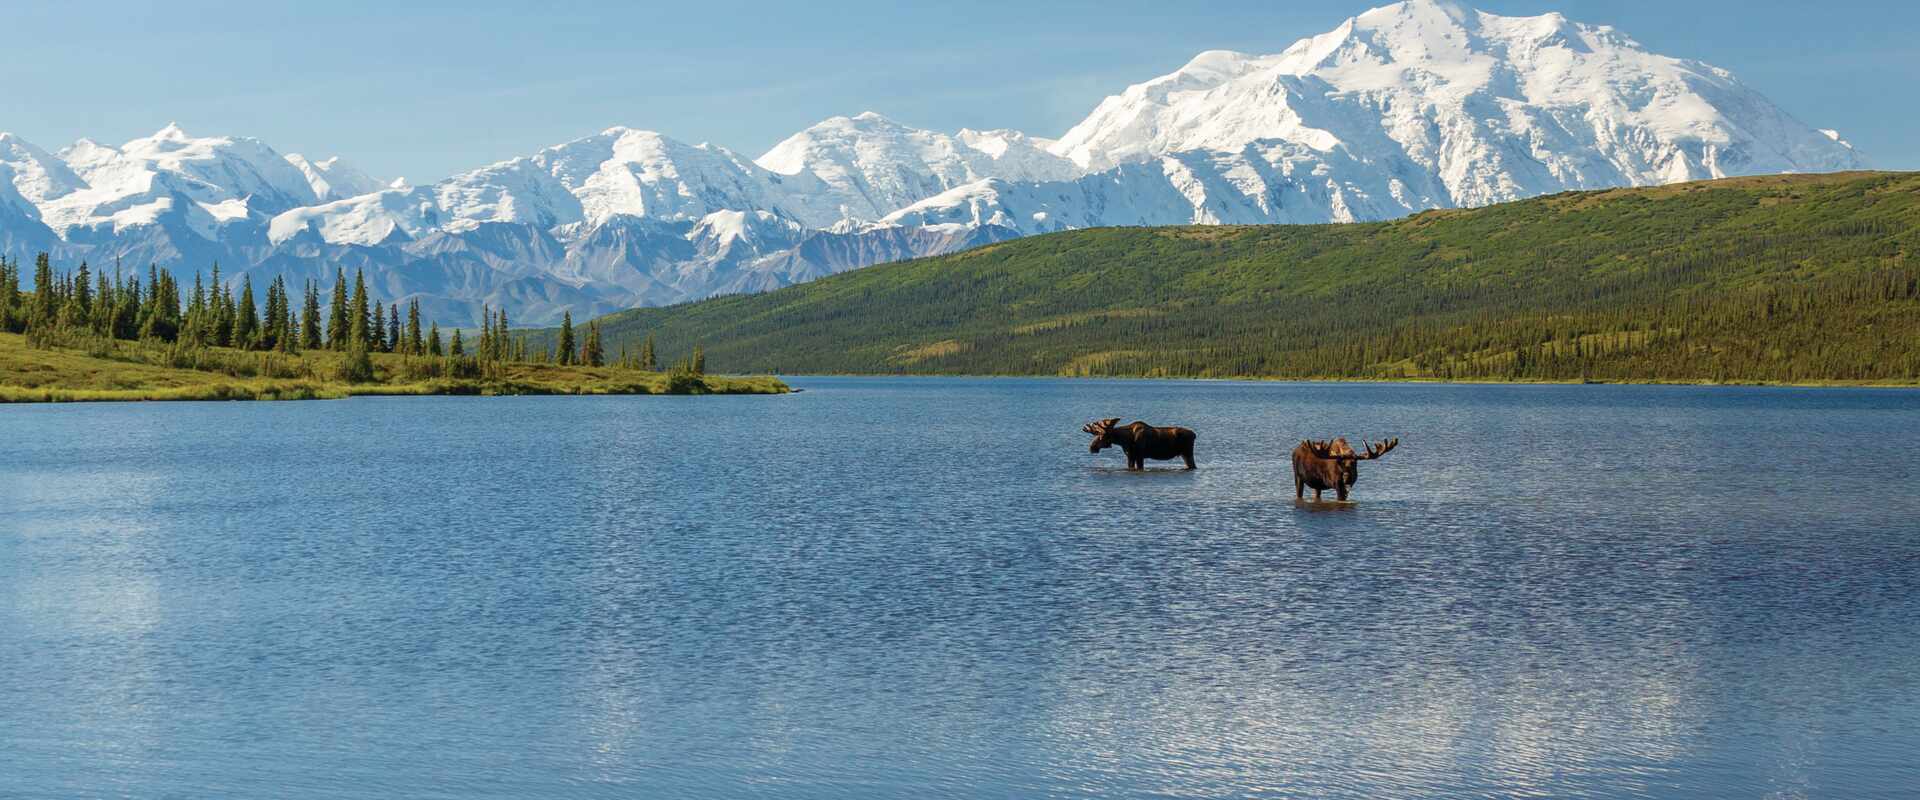 View of two moose in lake surrounded by green mountains, Alaska